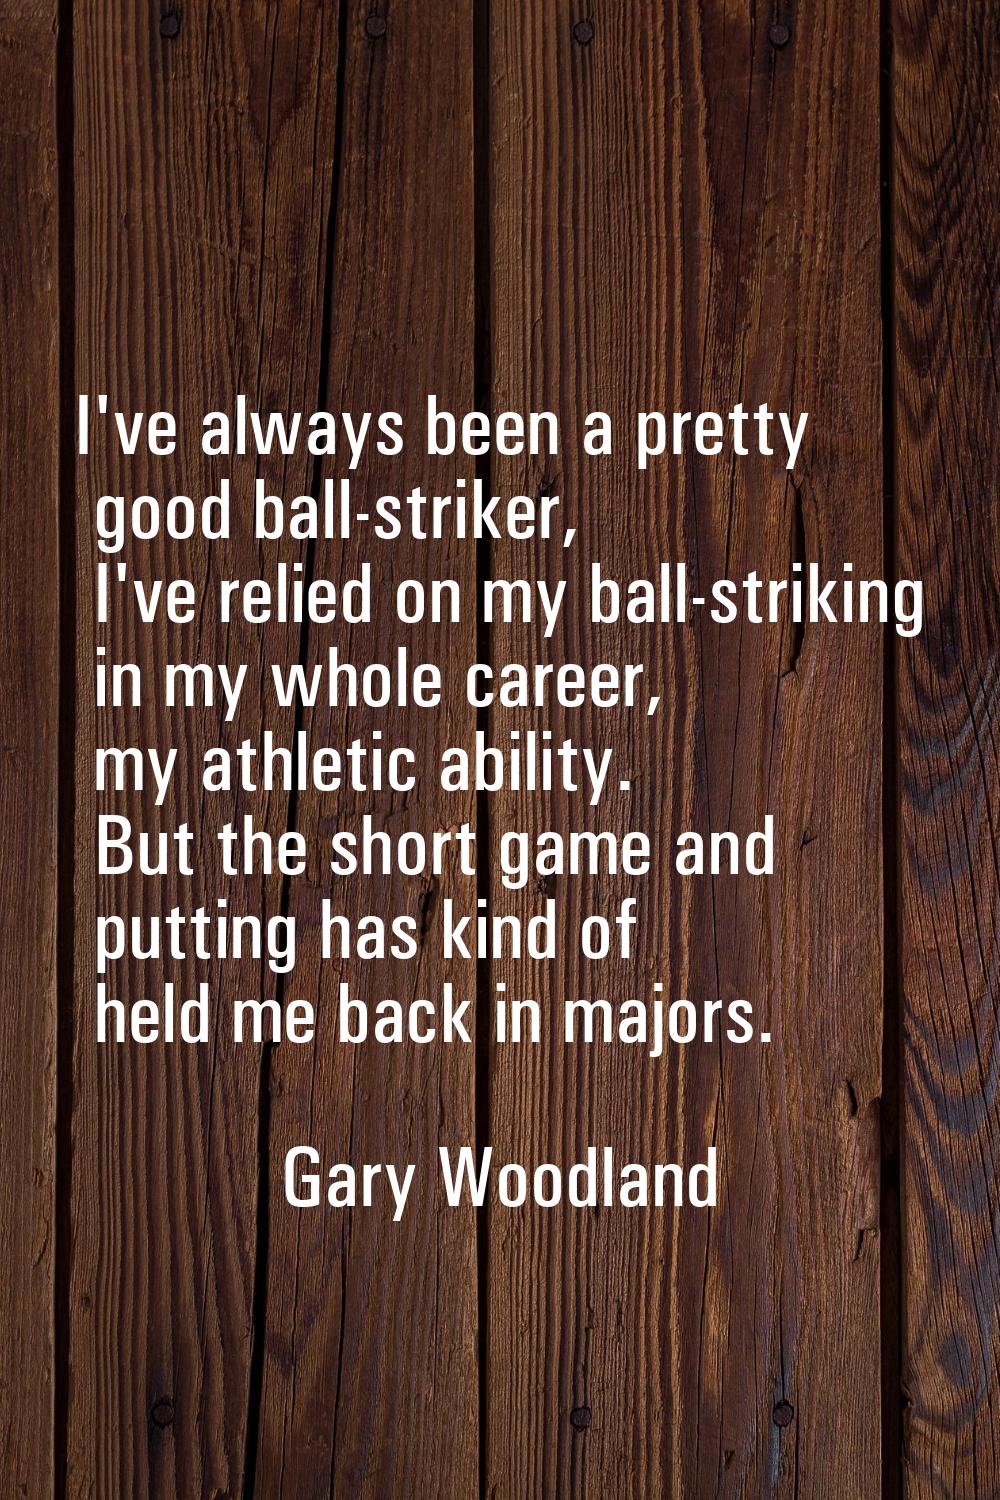 I've always been a pretty good ball-striker, I've relied on my ball-striking in my whole career, my